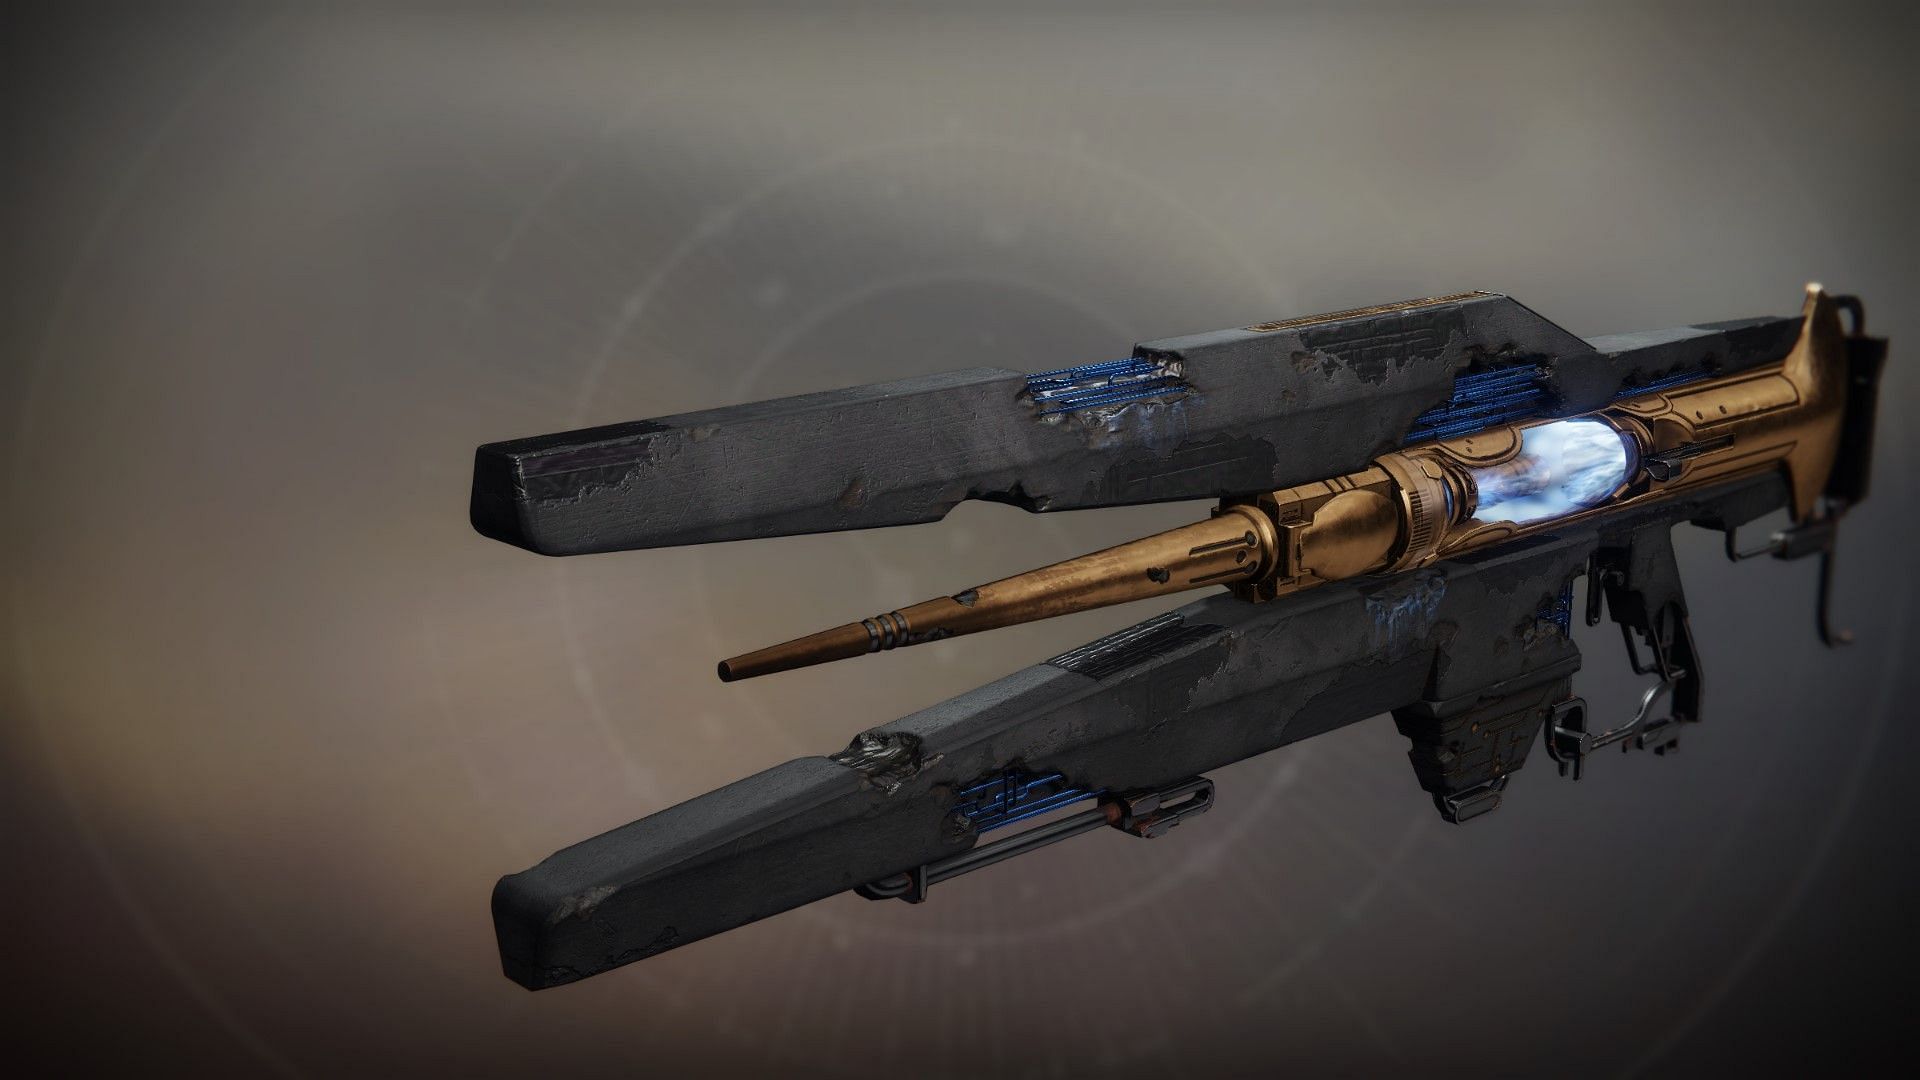 The Divinity is an extremely powerful weapon in the game (Image via Bungie)